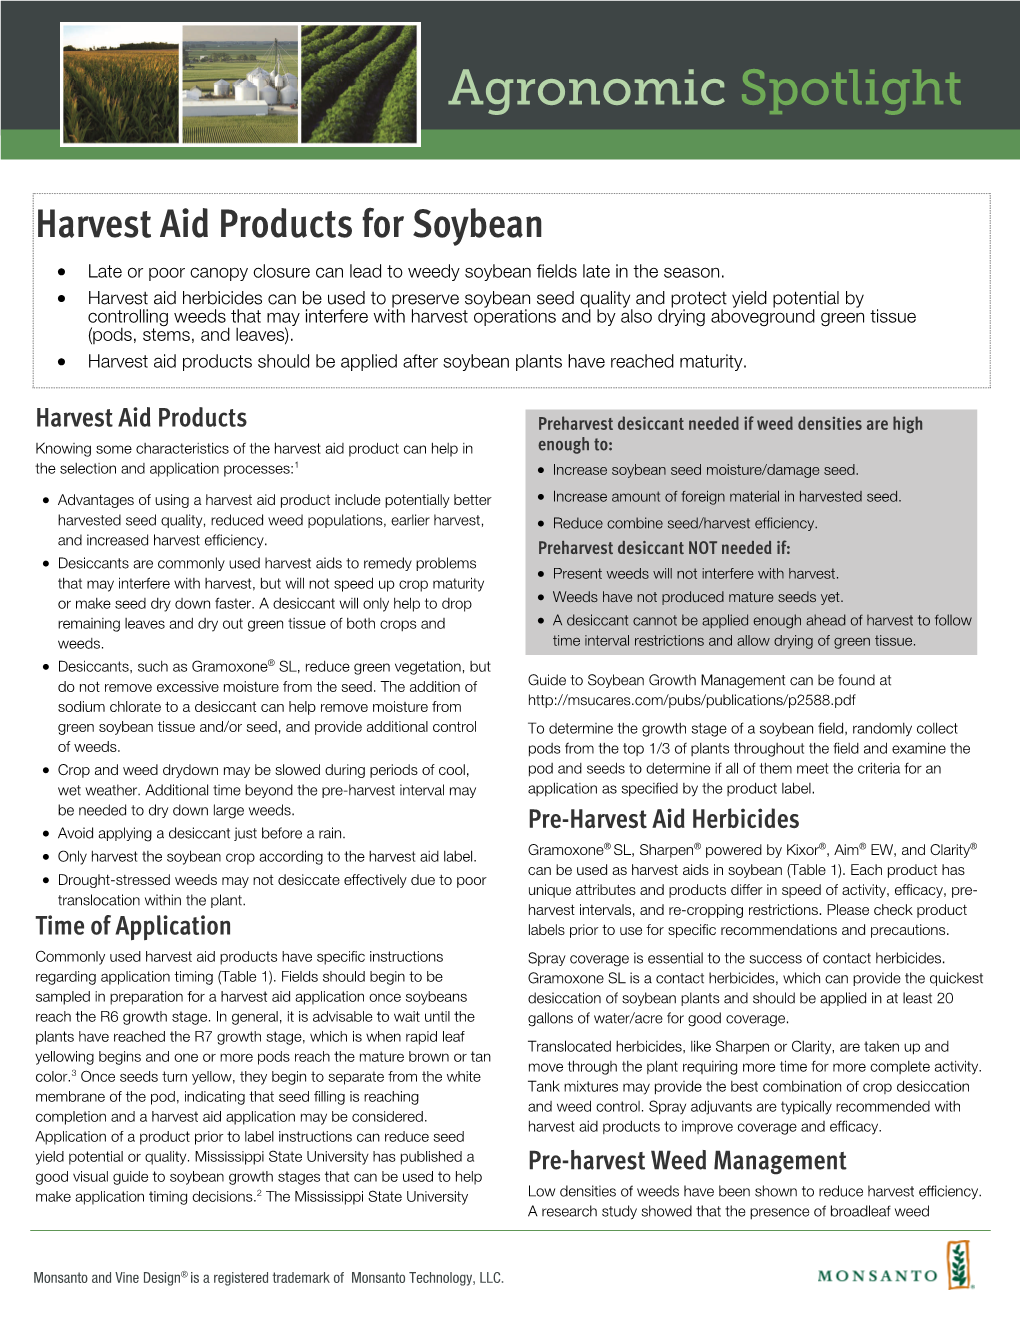 Pre-Harvest Aid Herbicides  Avoid Applying a Desiccant Just Before a Rain